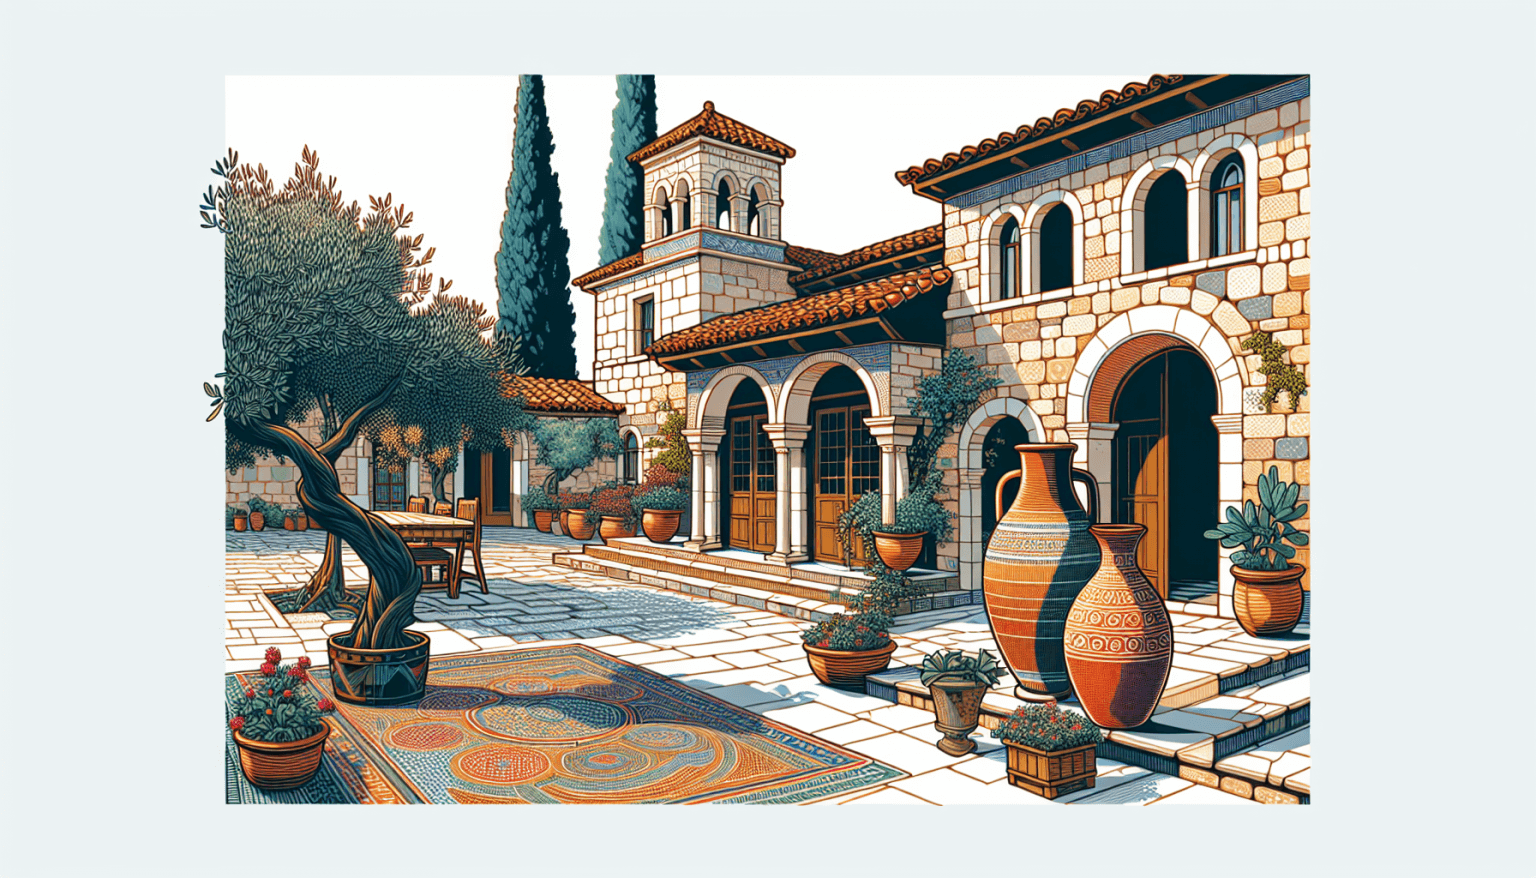 Create an image depicting a traditional Mediterranean home from the time of Jesus, showcasing architectural features such as stone walls, arched doorways, and a terracotta roof. Include elements like